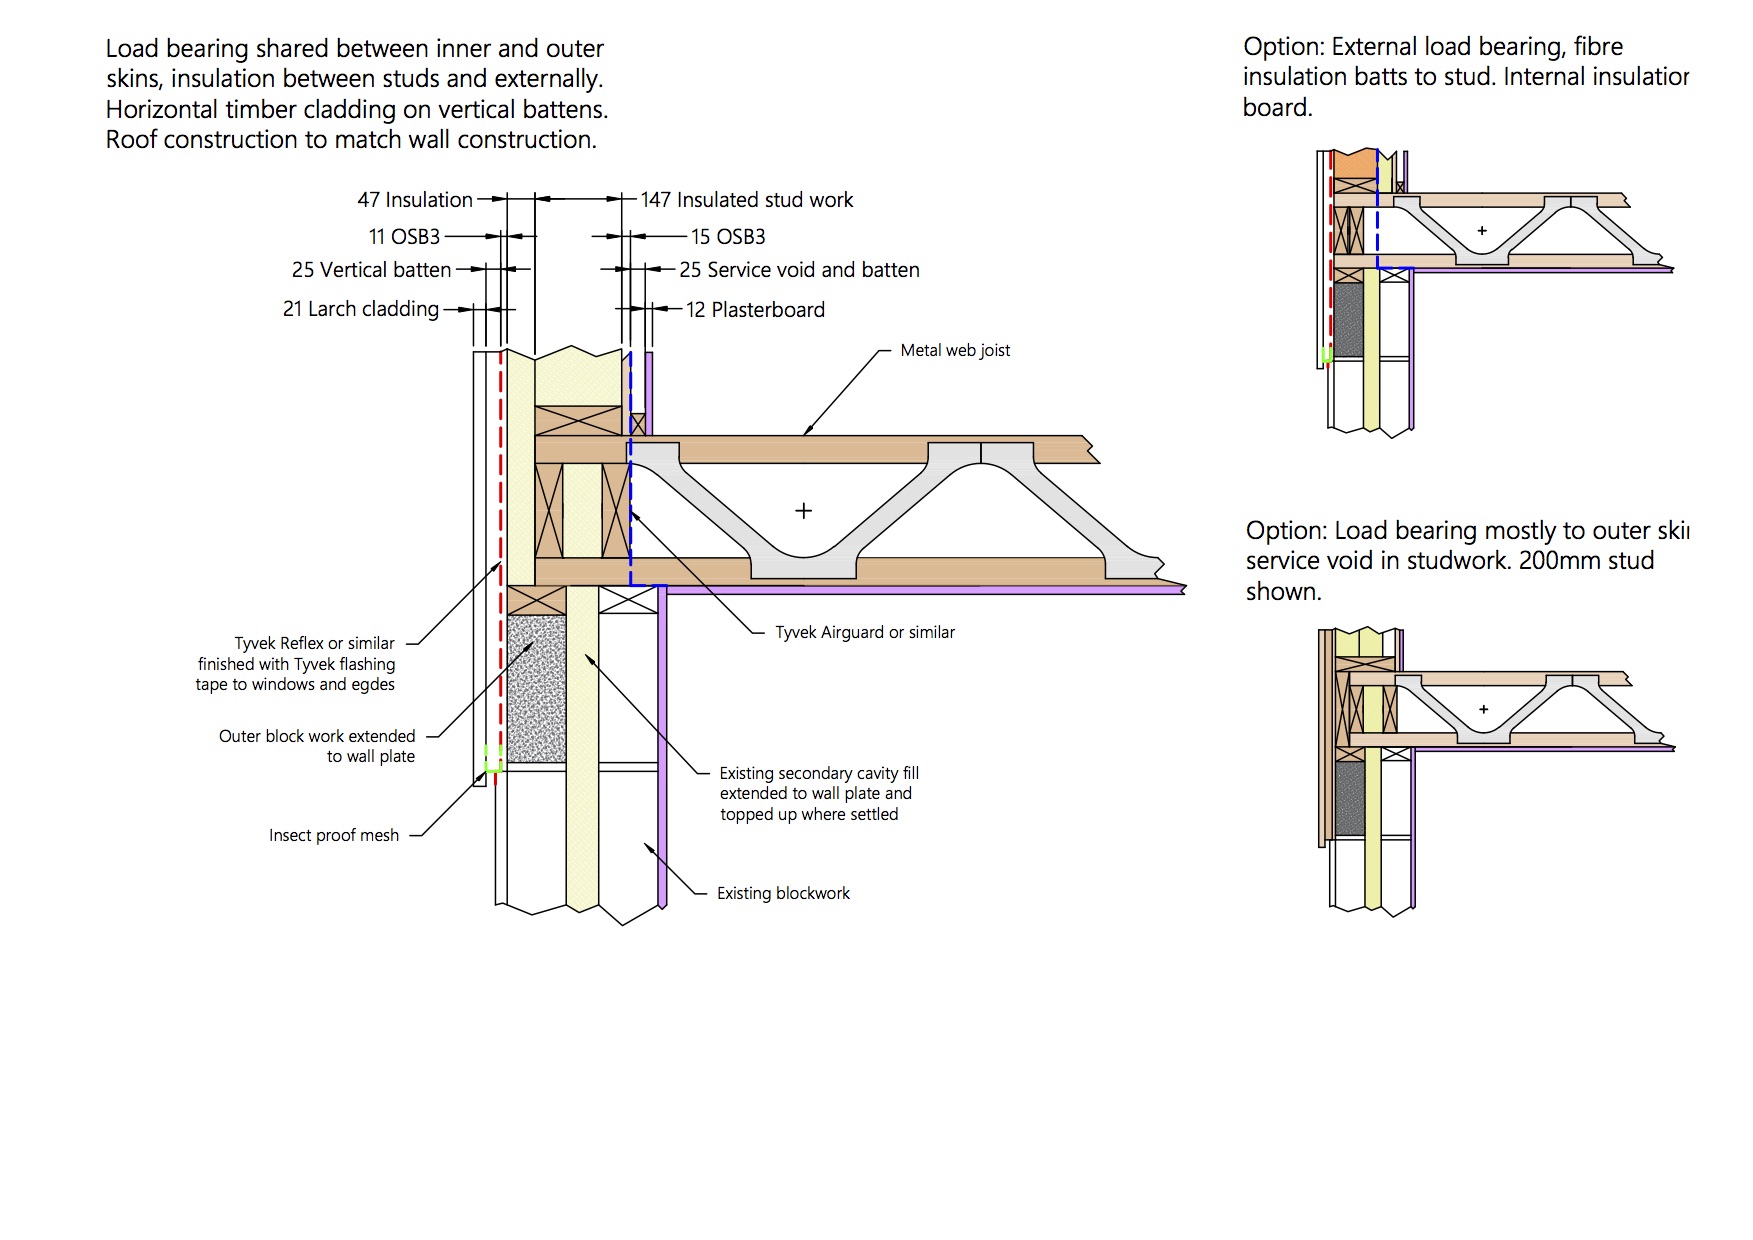 Building A Timber Frame First Floor Over A Cavity Wall Timber